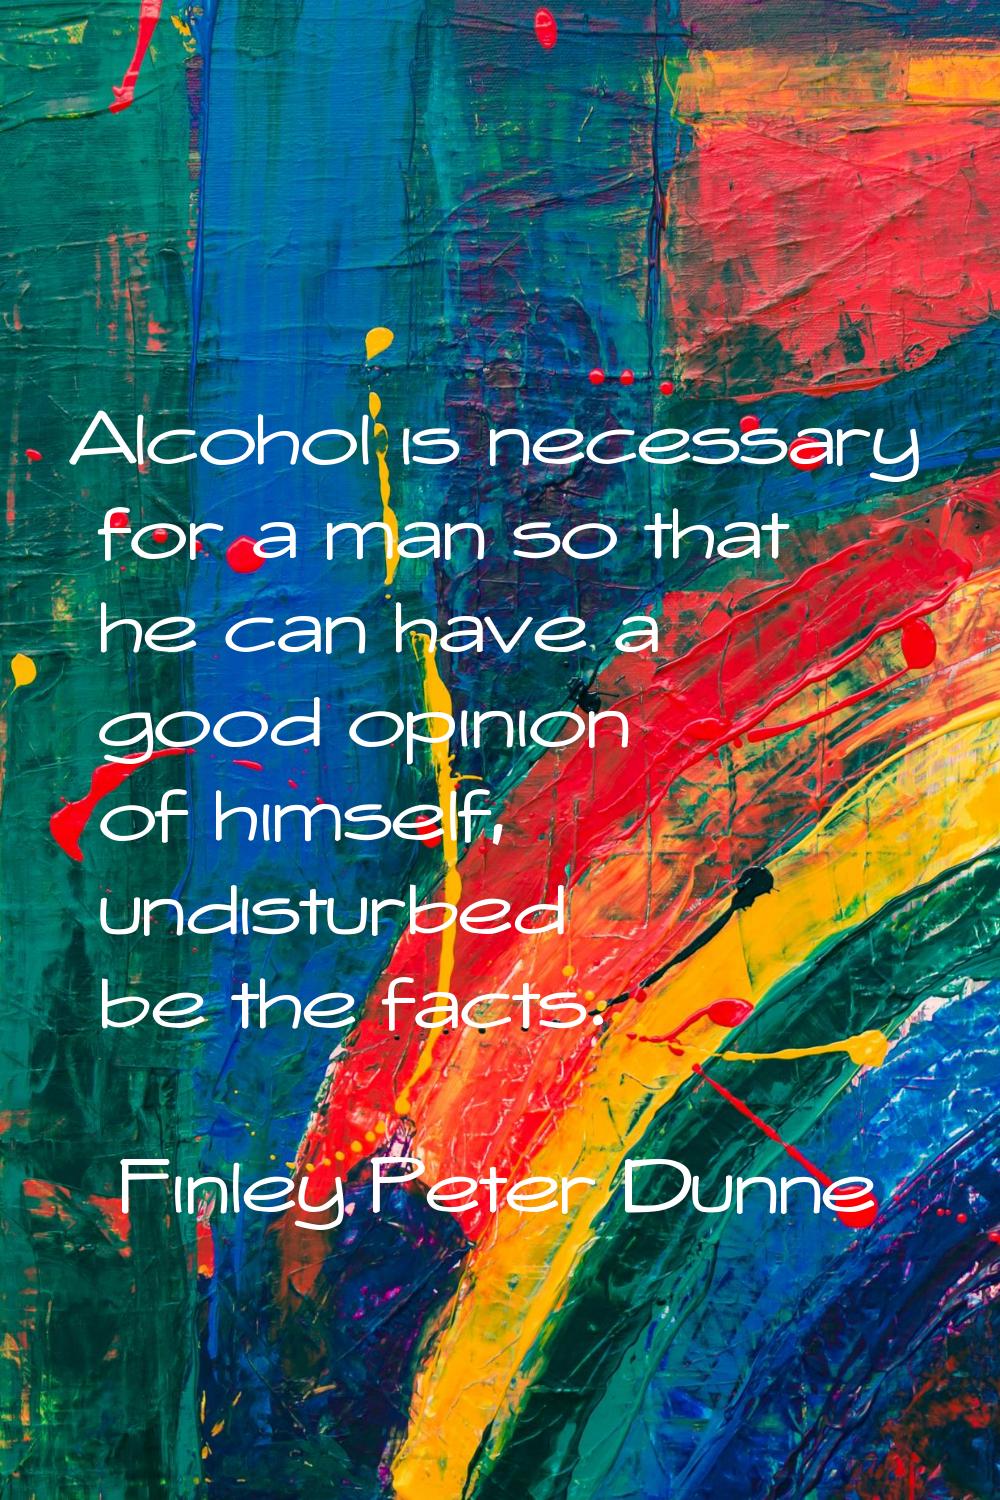 Alcohol is necessary for a man so that he can have a good opinion of himself, undisturbed be the fa